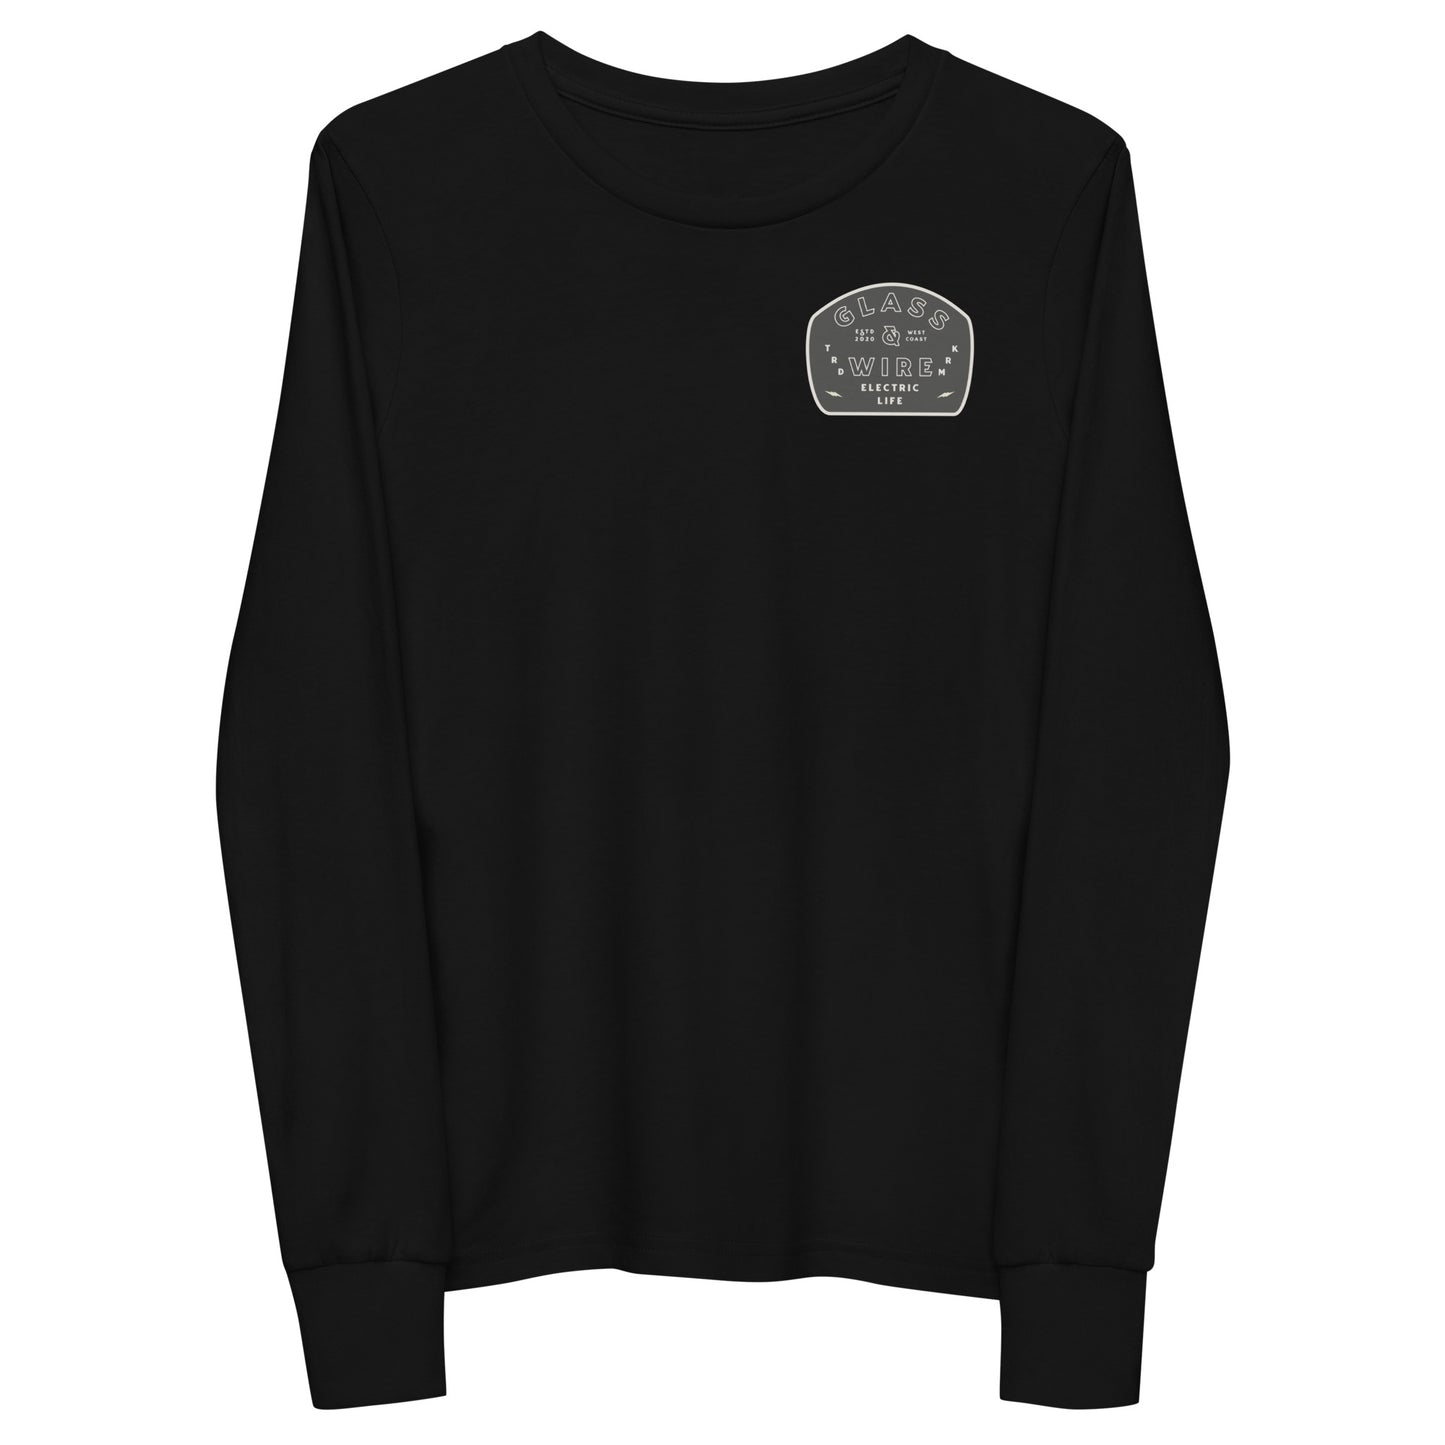 GLASS & WIRE YOUTH LONG SLEEVE